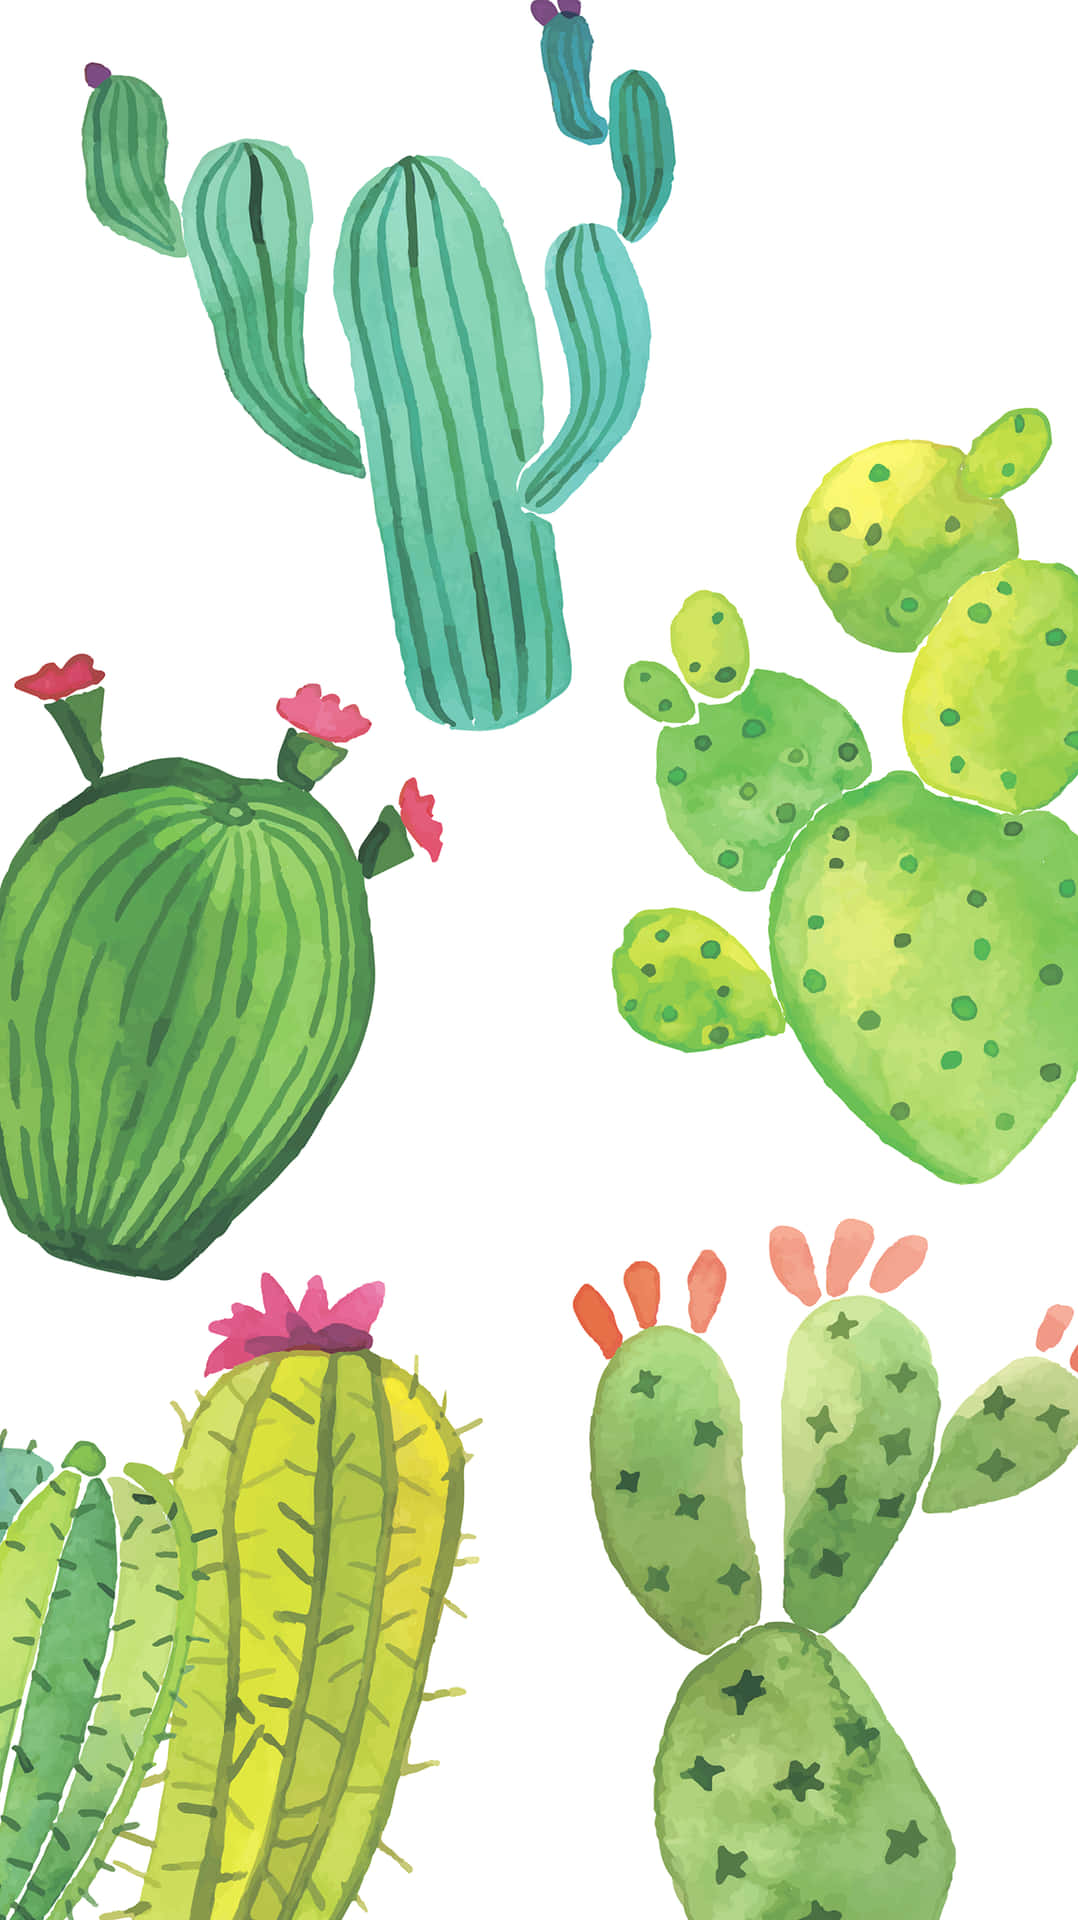 Bring Energy to Your Home with a Cactus